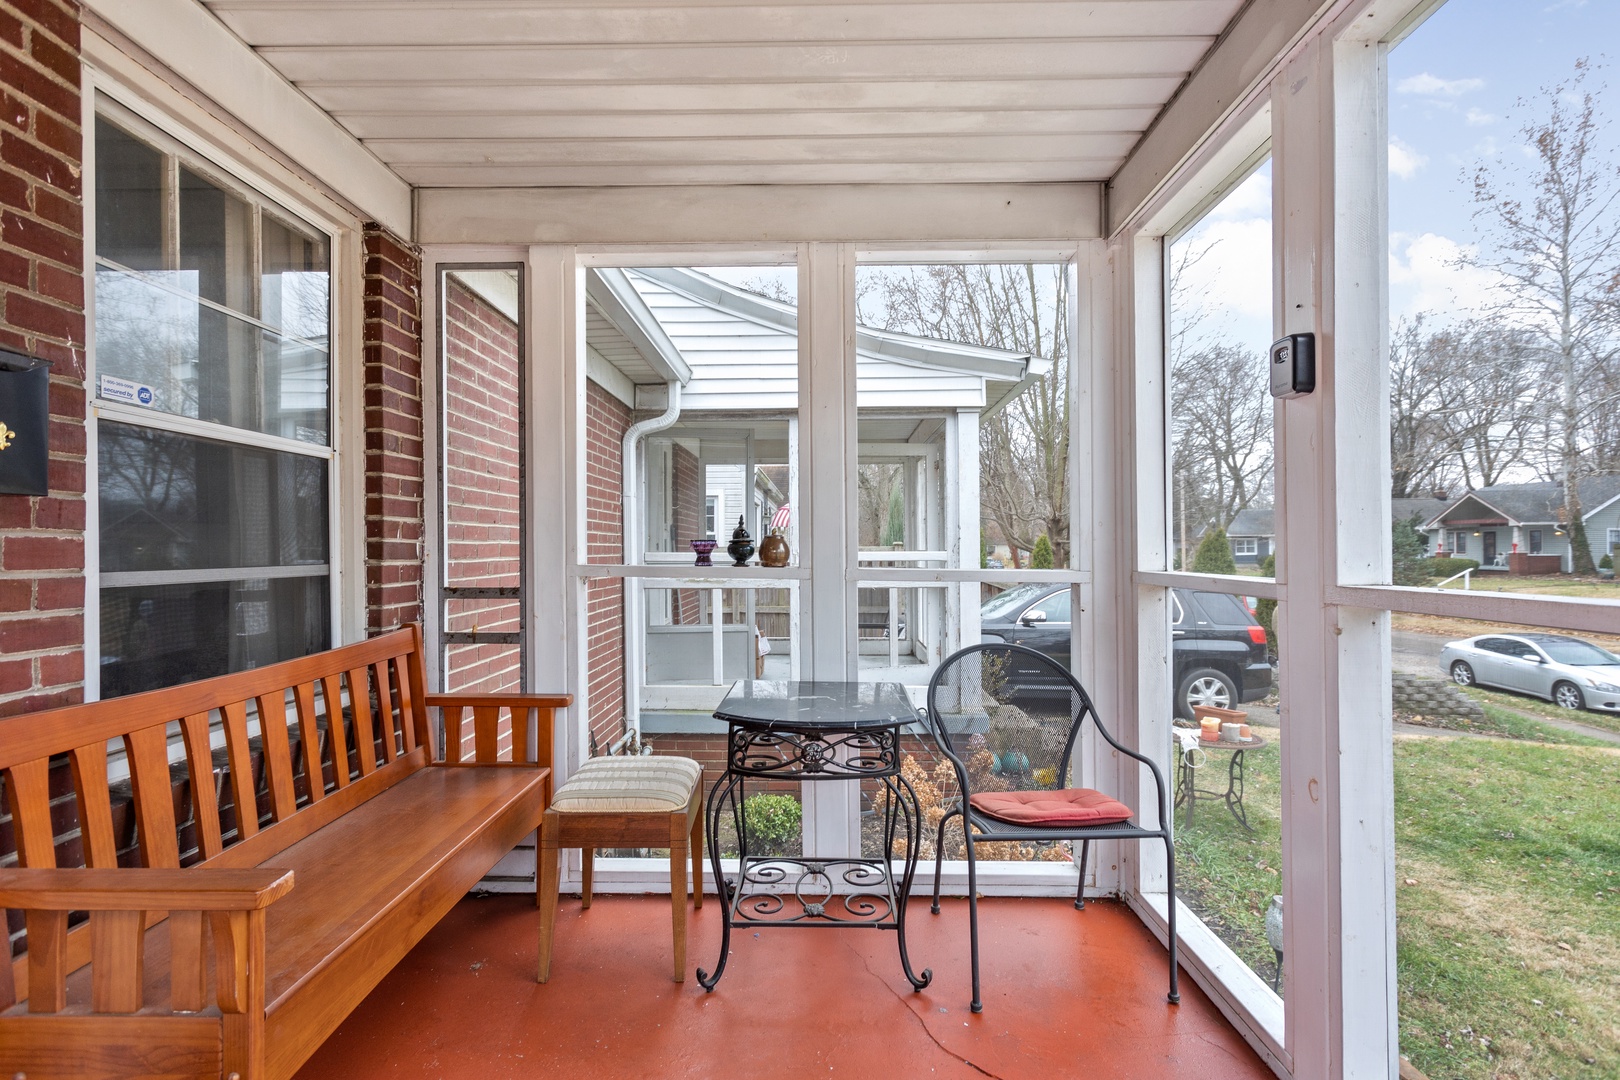 Stay for Indy500/GenCon -Broad Ripple Bungalow!